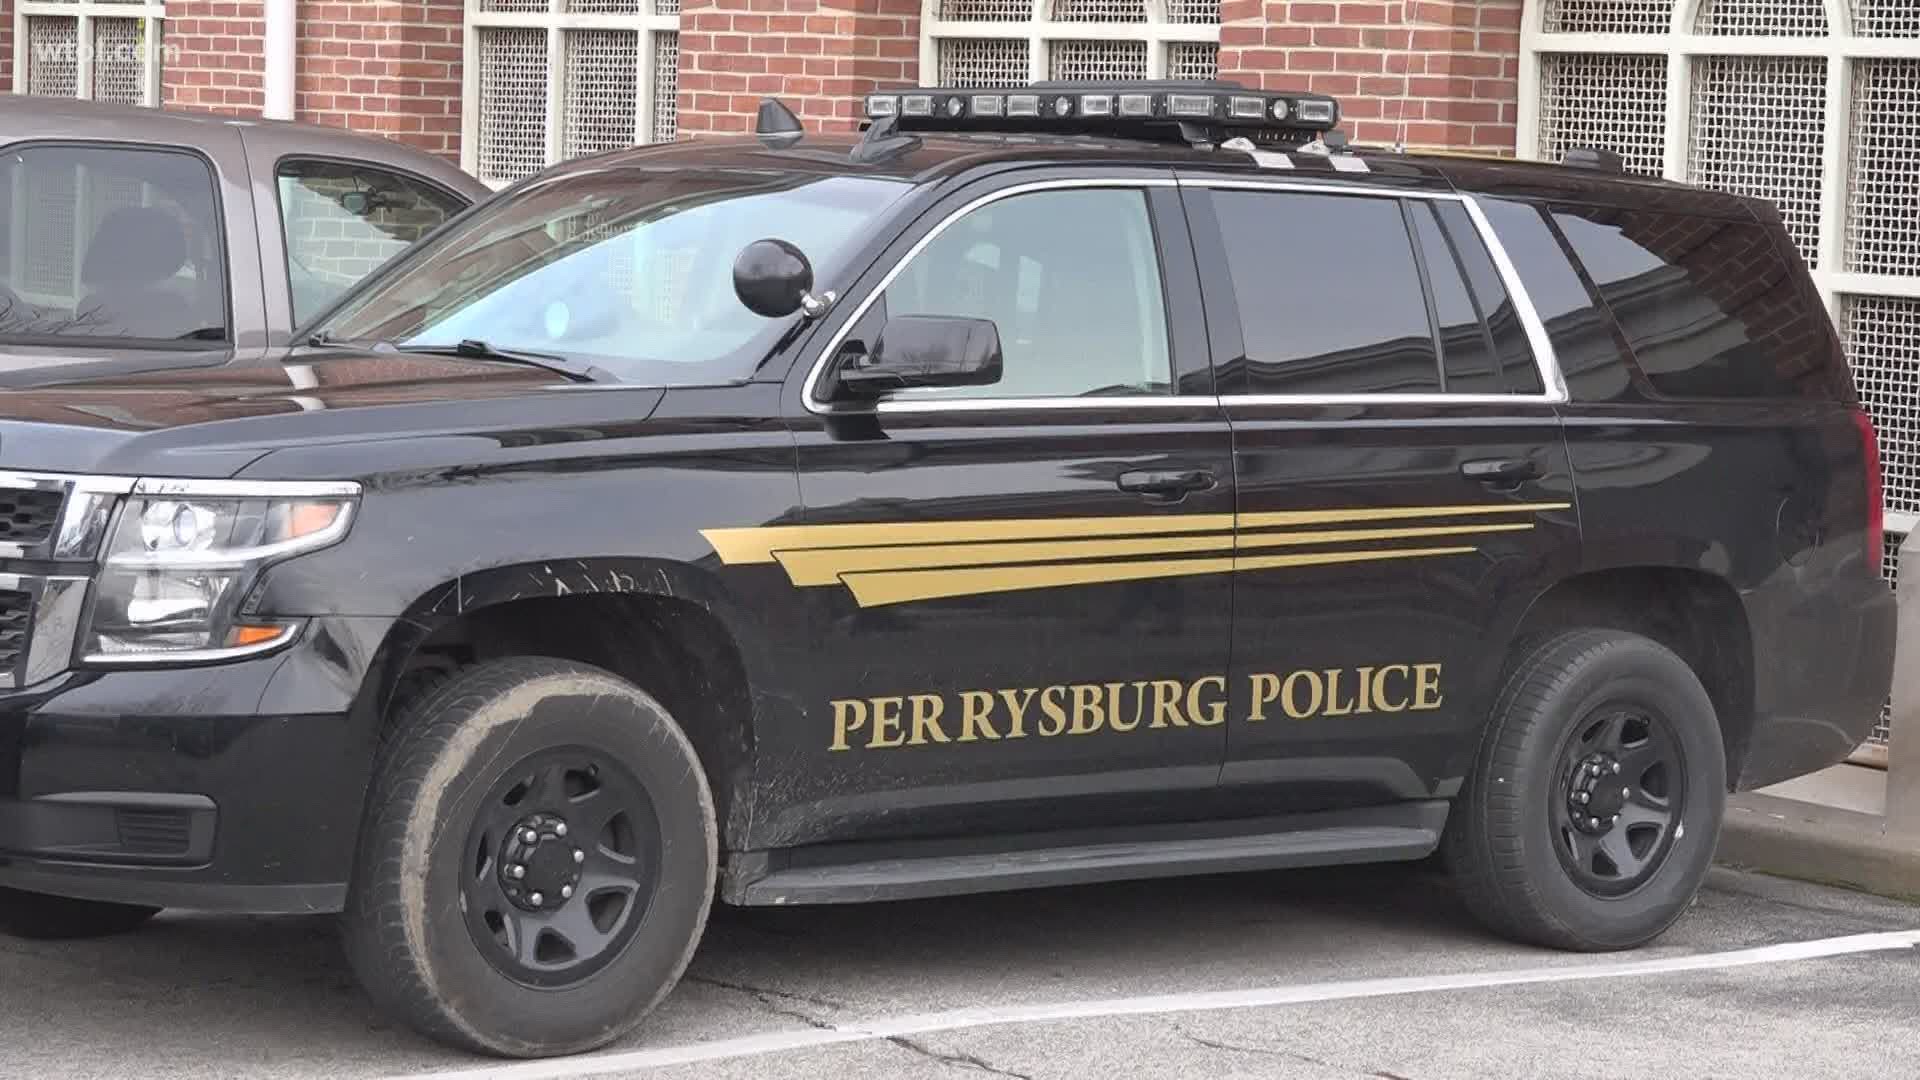 Come Monday, officers with the Perrysburg Police Division will all be wearing body cameras.